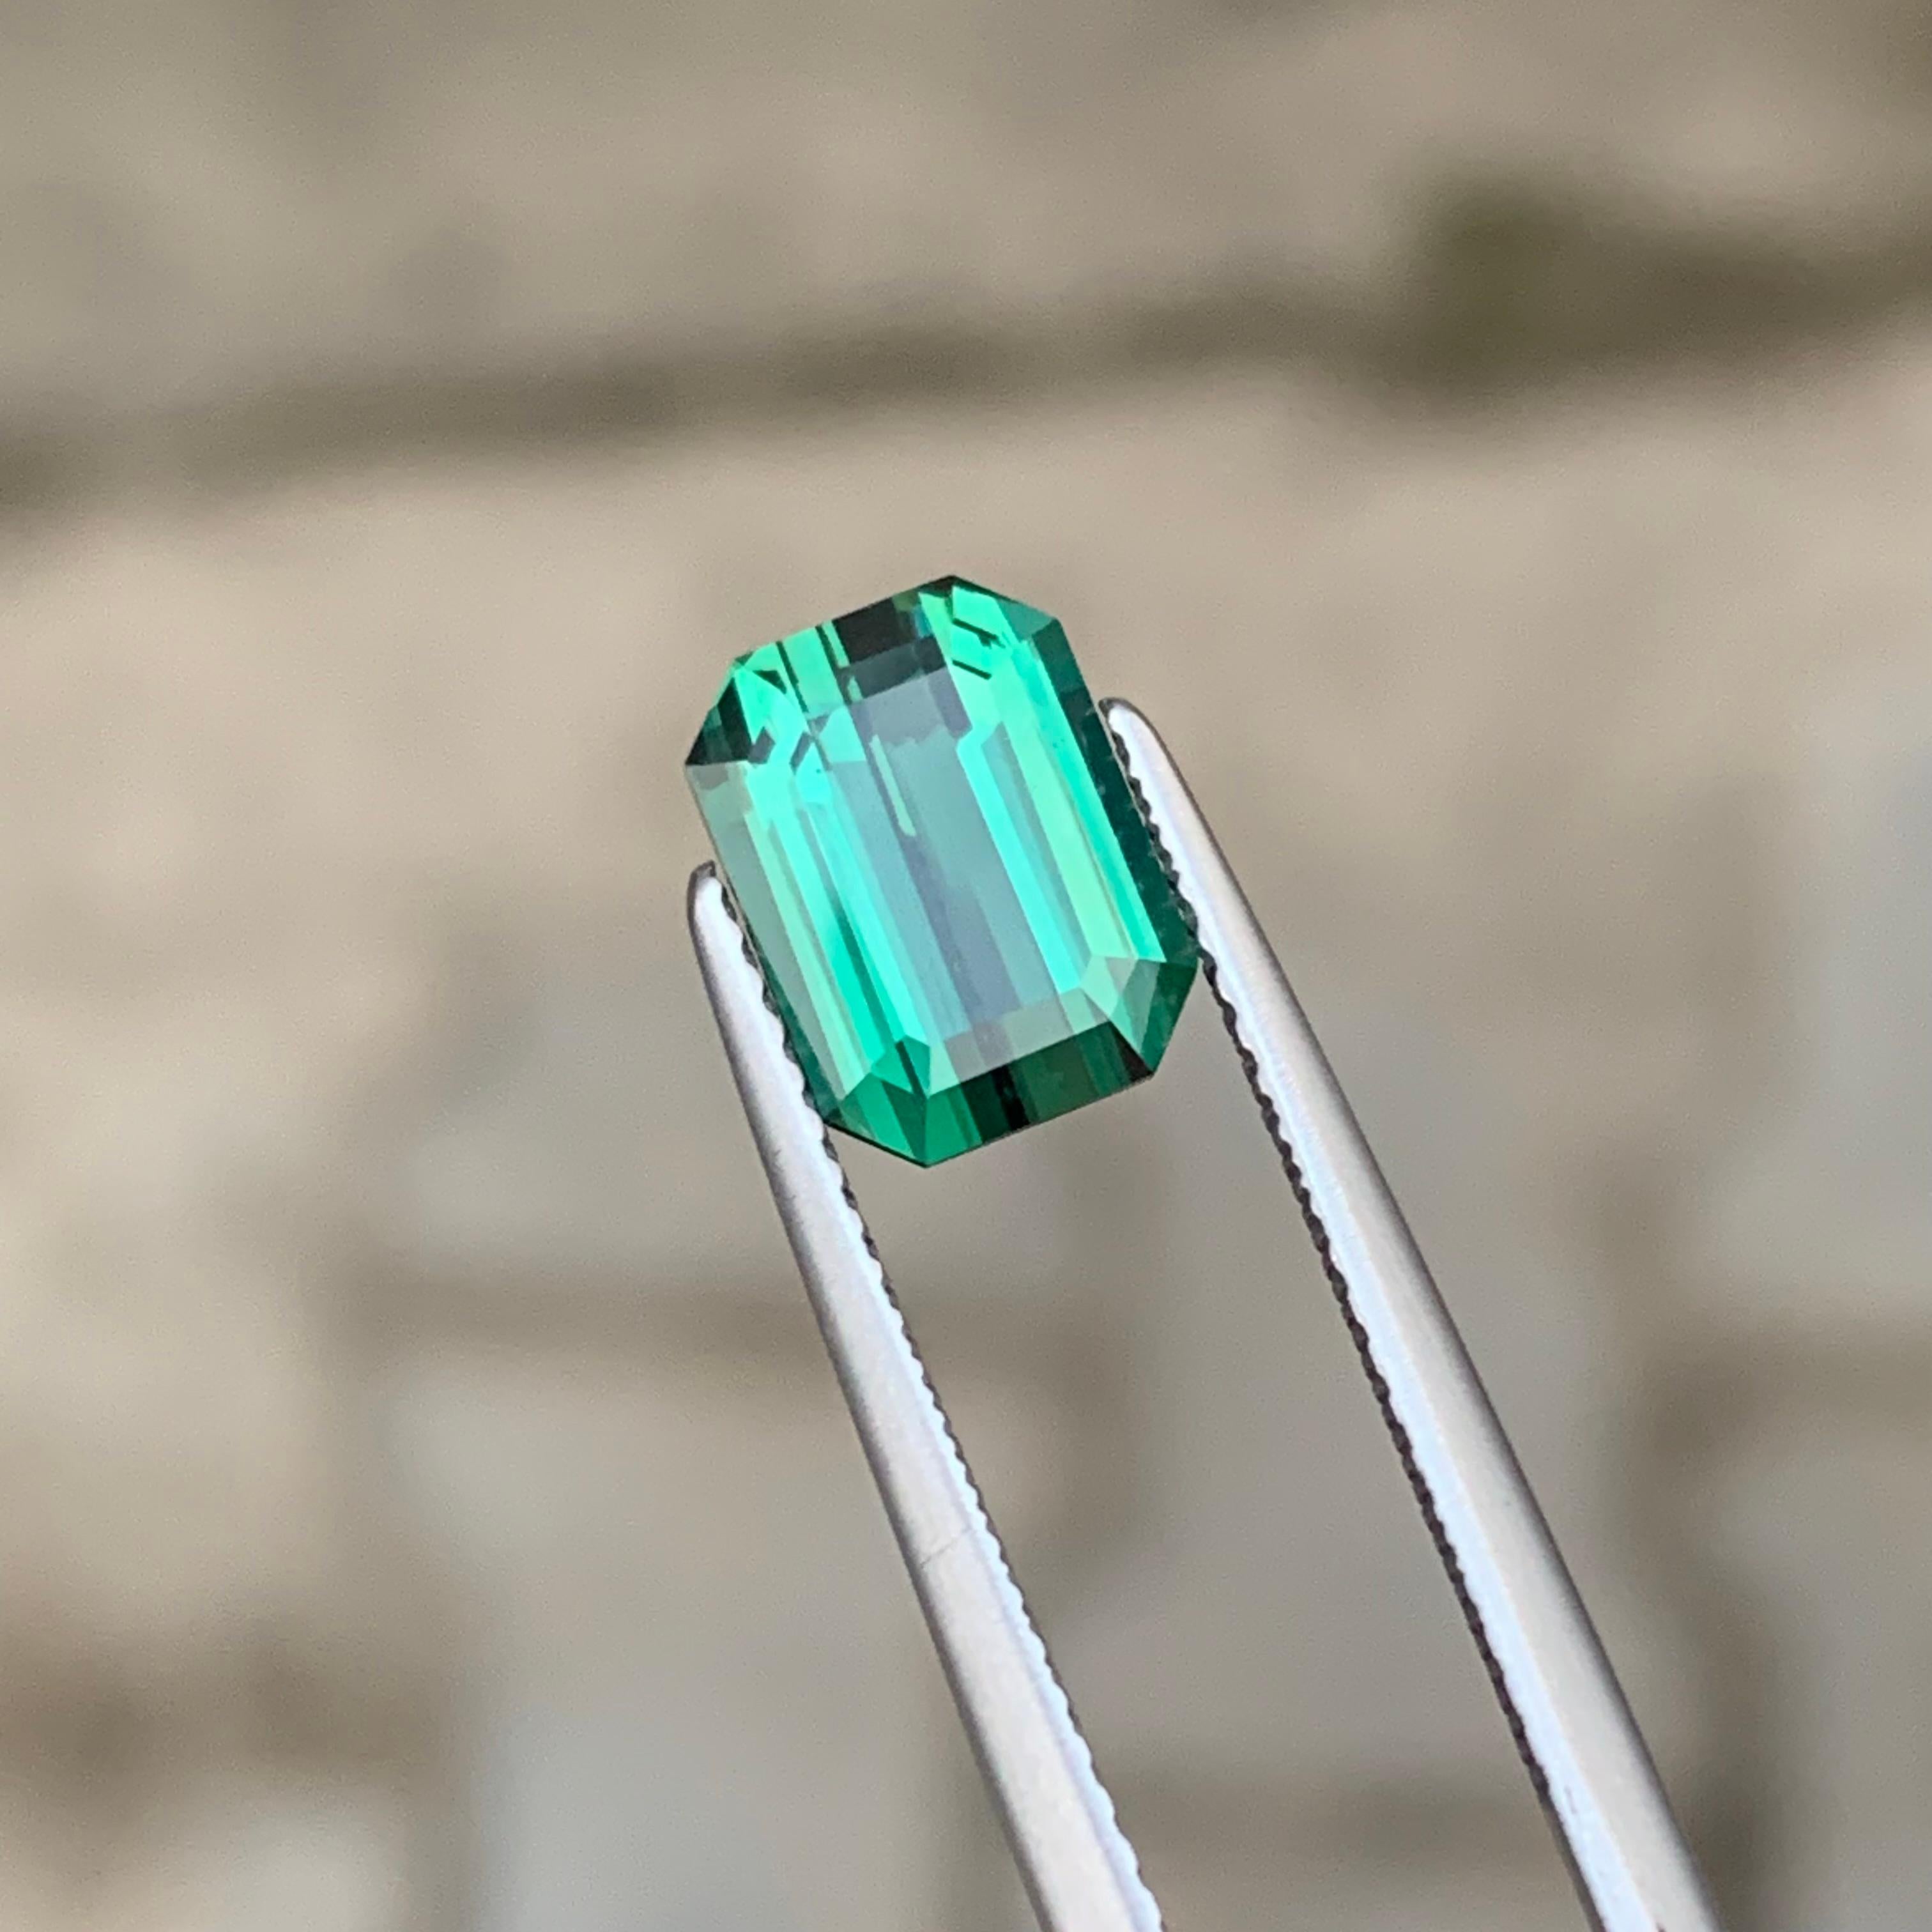 Emerald Cut 2.20 Carat Loose Lagoon Tourmaline Emerald Shape Gemstone Available for Sell For Sale